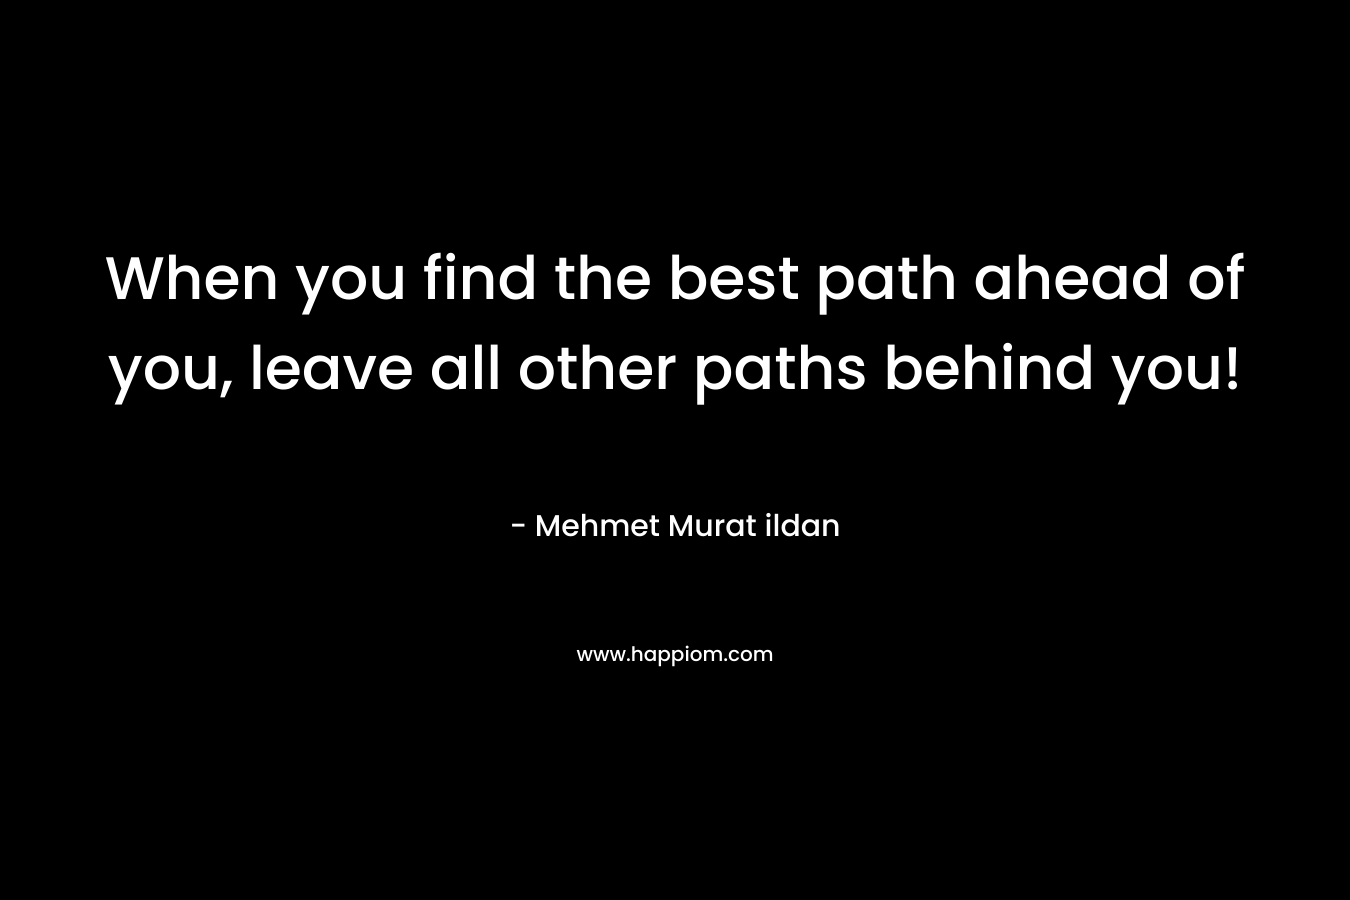 When you find the best path ahead of you, leave all other paths behind you!